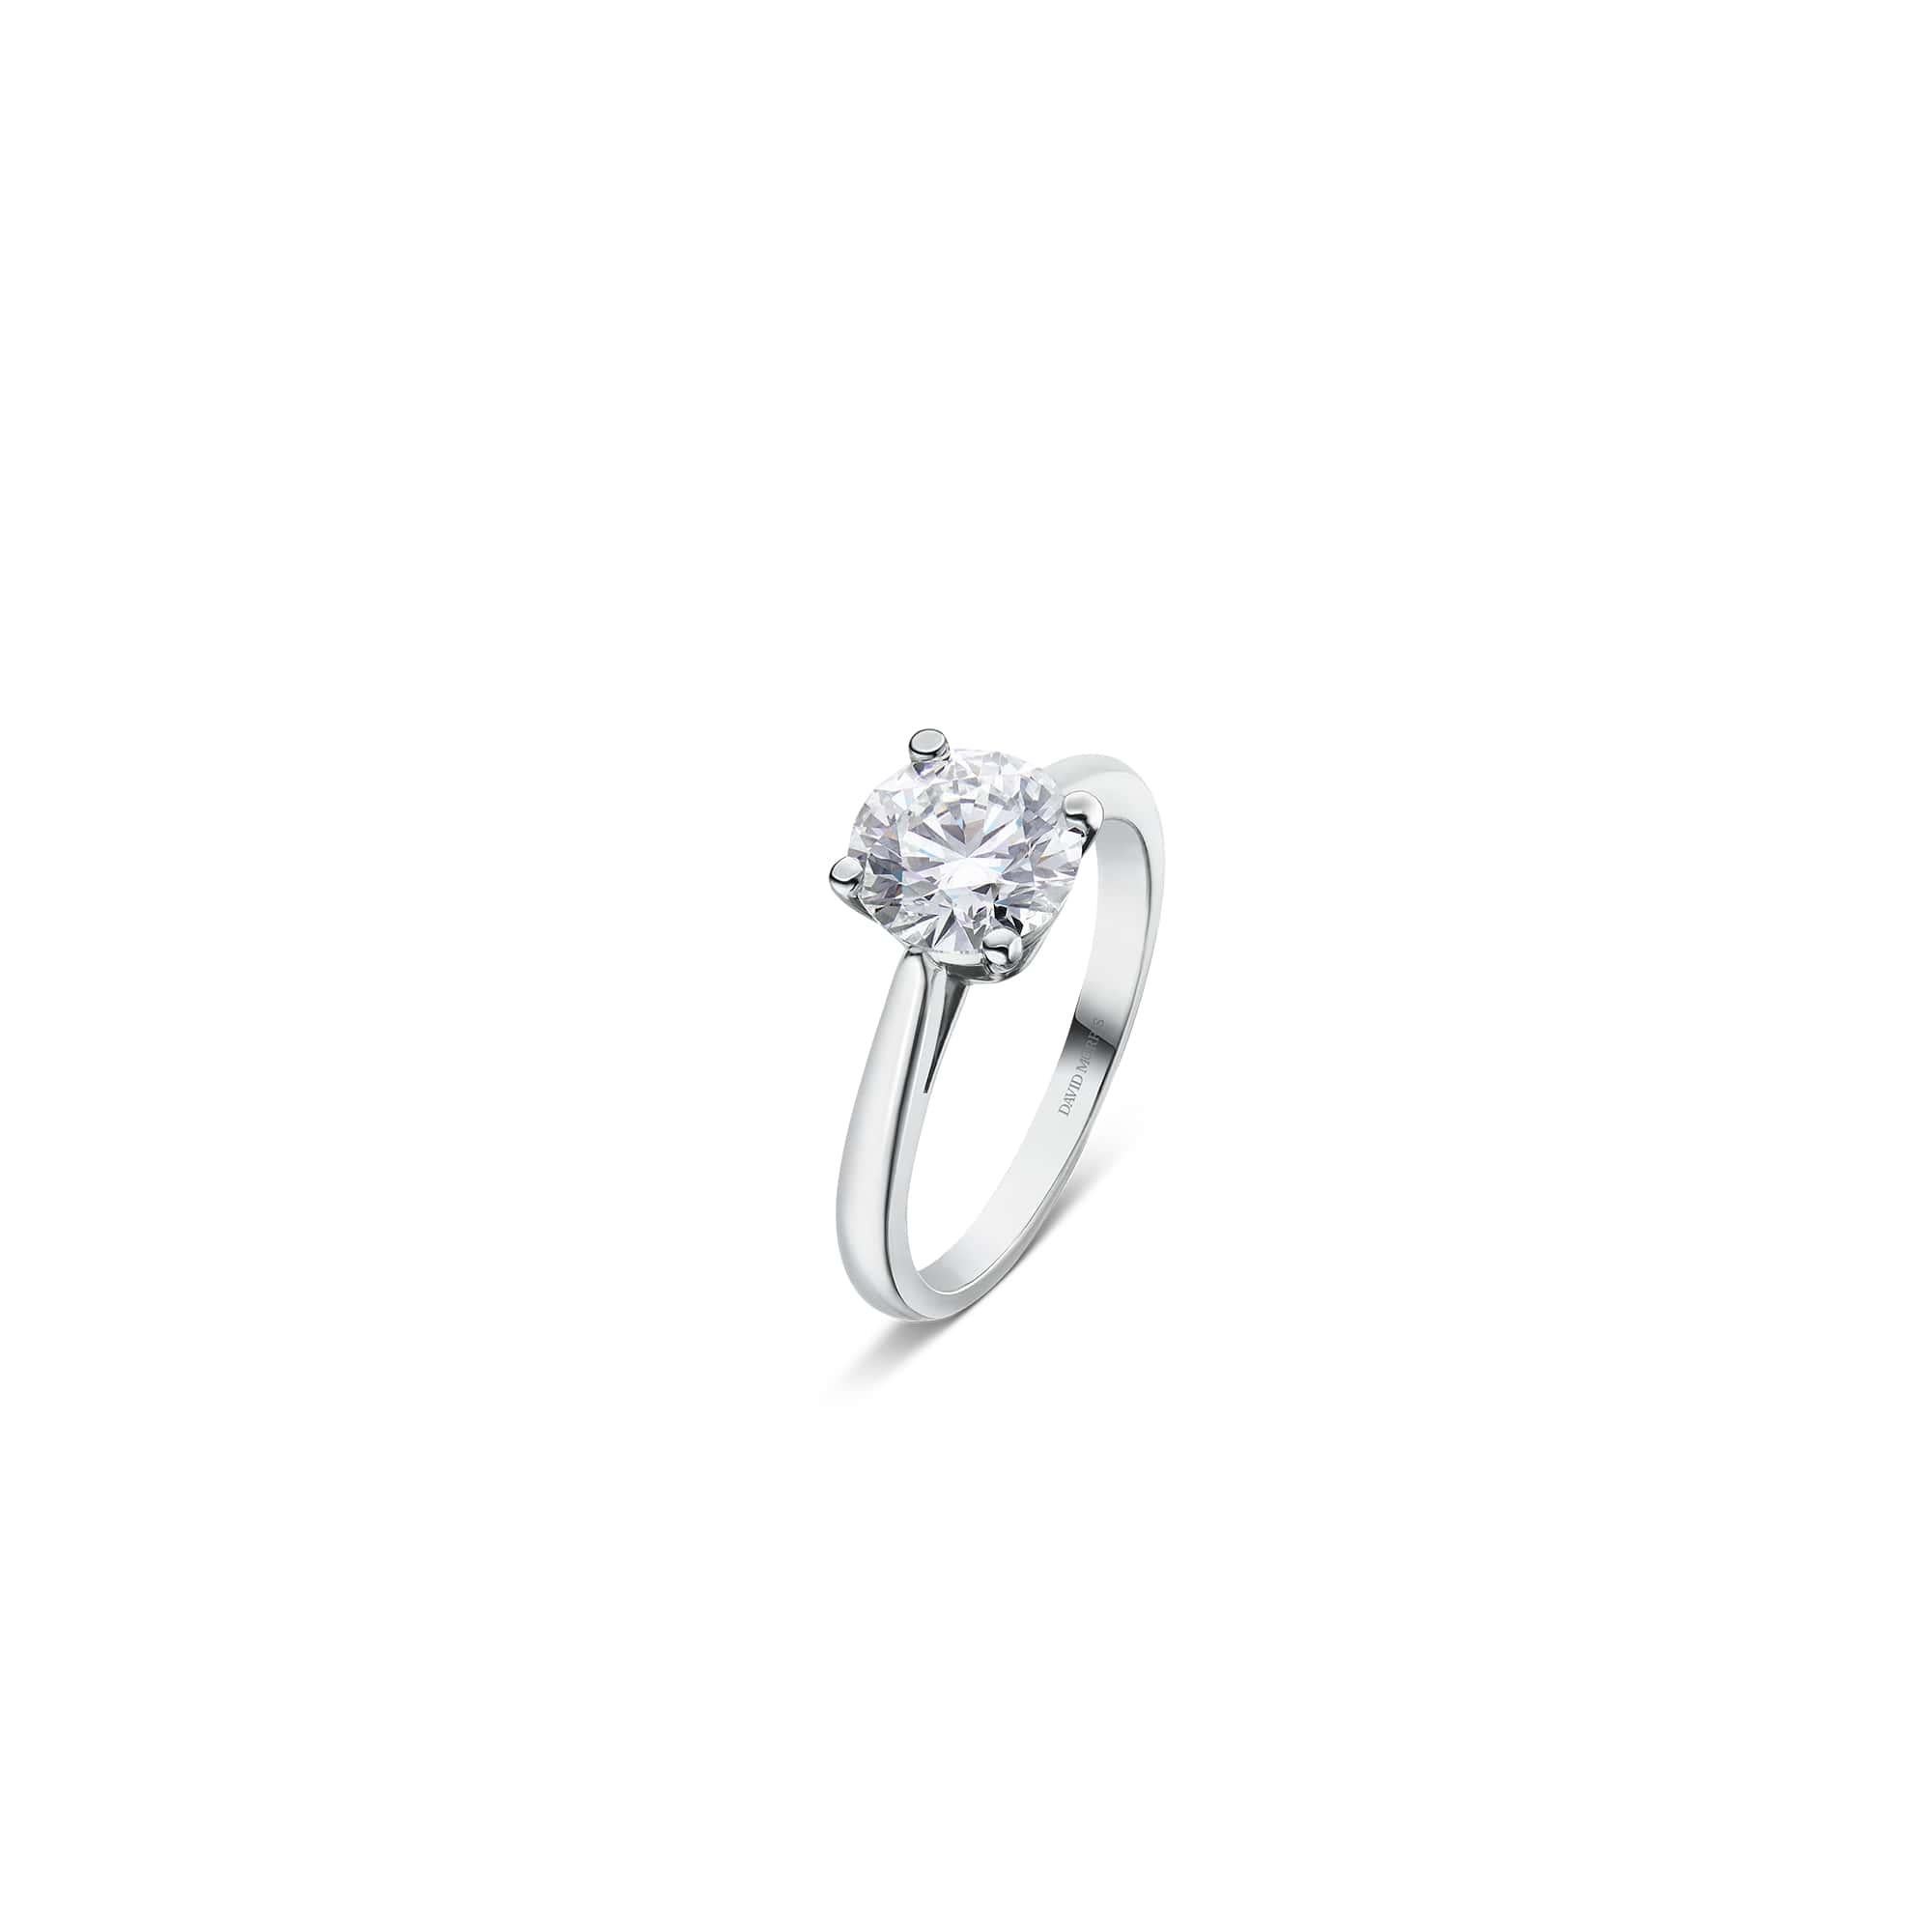 Exclusively crafted by David Morris London, this 1.54 carat round white diamond platinum solitaire ring epitomizes sophistication and artistry. The meticulously designed four-claw setting elevates the diamond to new heights of brilliance, allowing